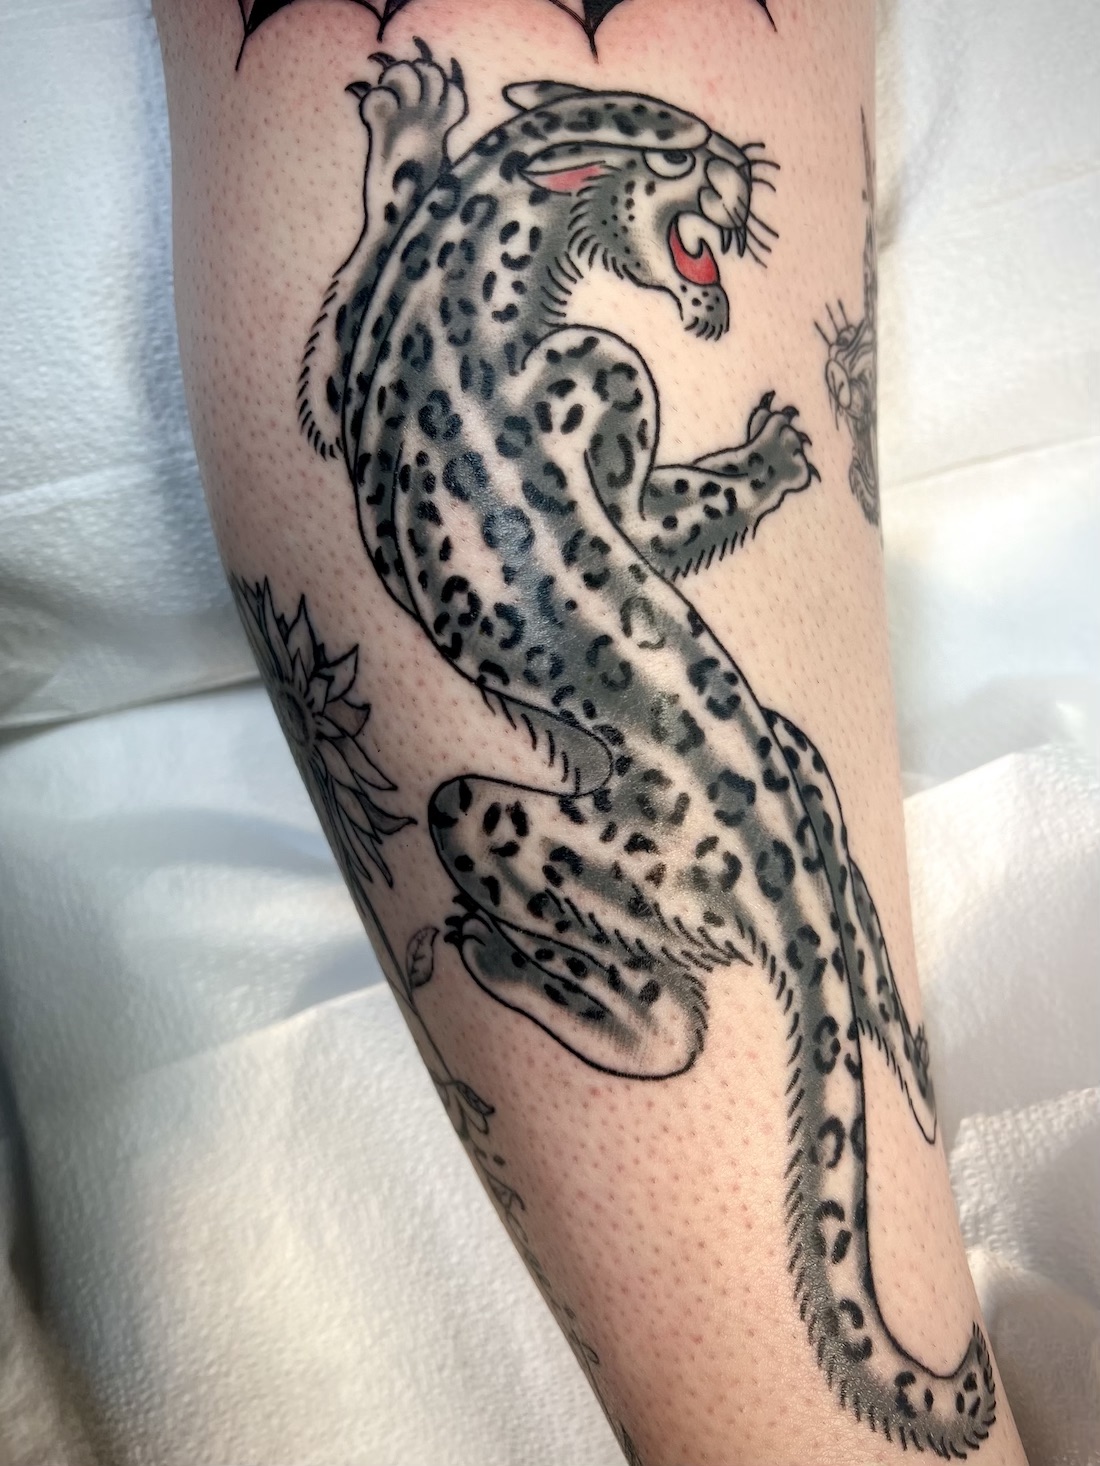 Crawling snow leopard tattooed in the American Traditional style. Made at Denver's finest Dedication Tattoo.